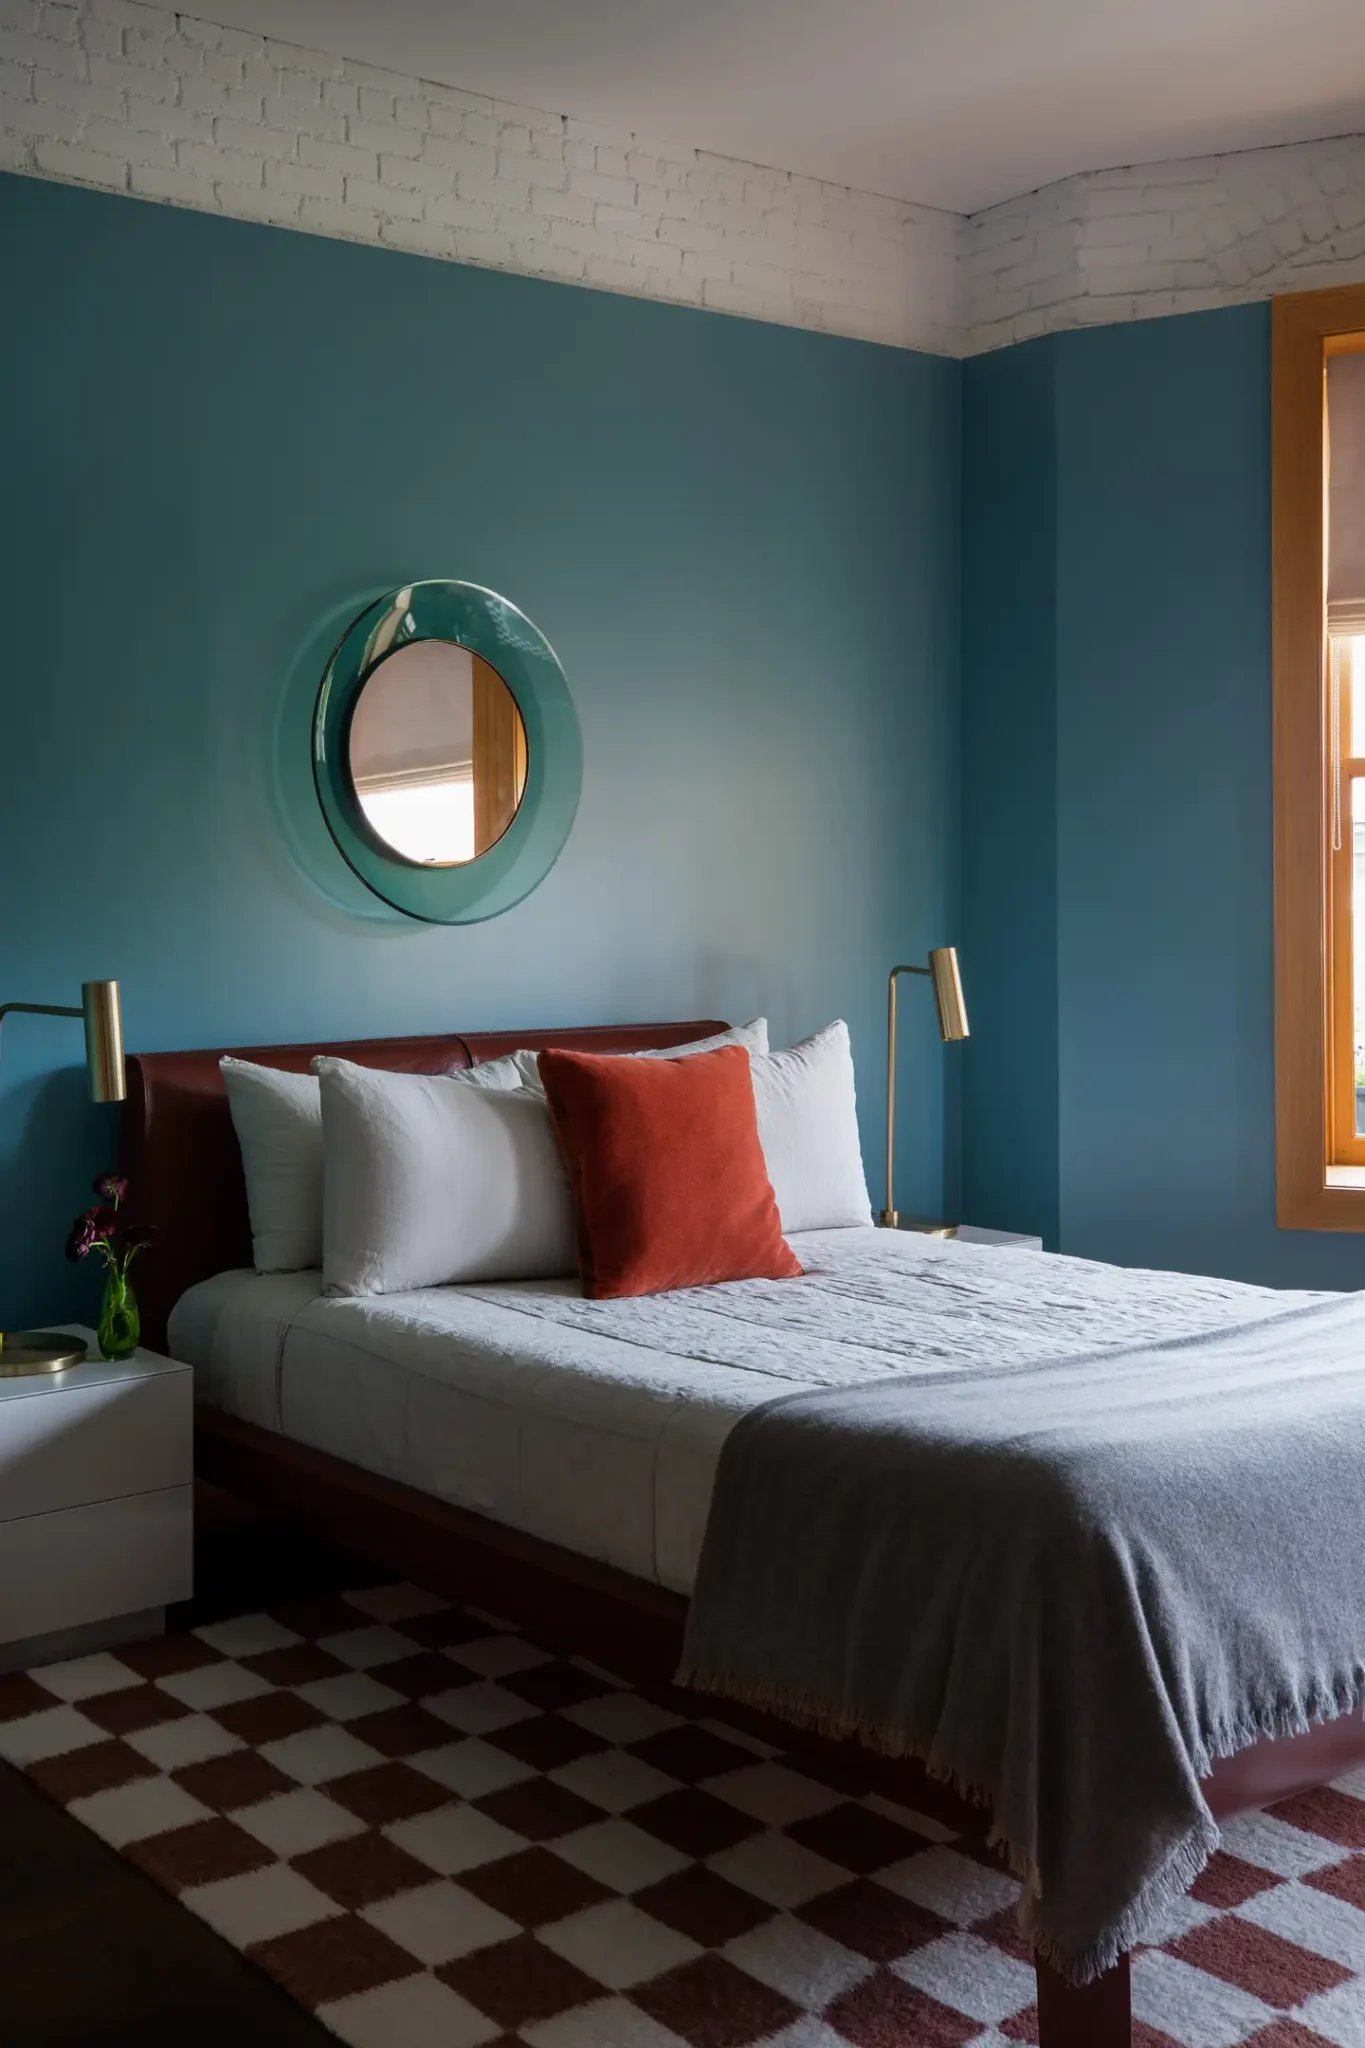 Modern bedroom with turquoise walls